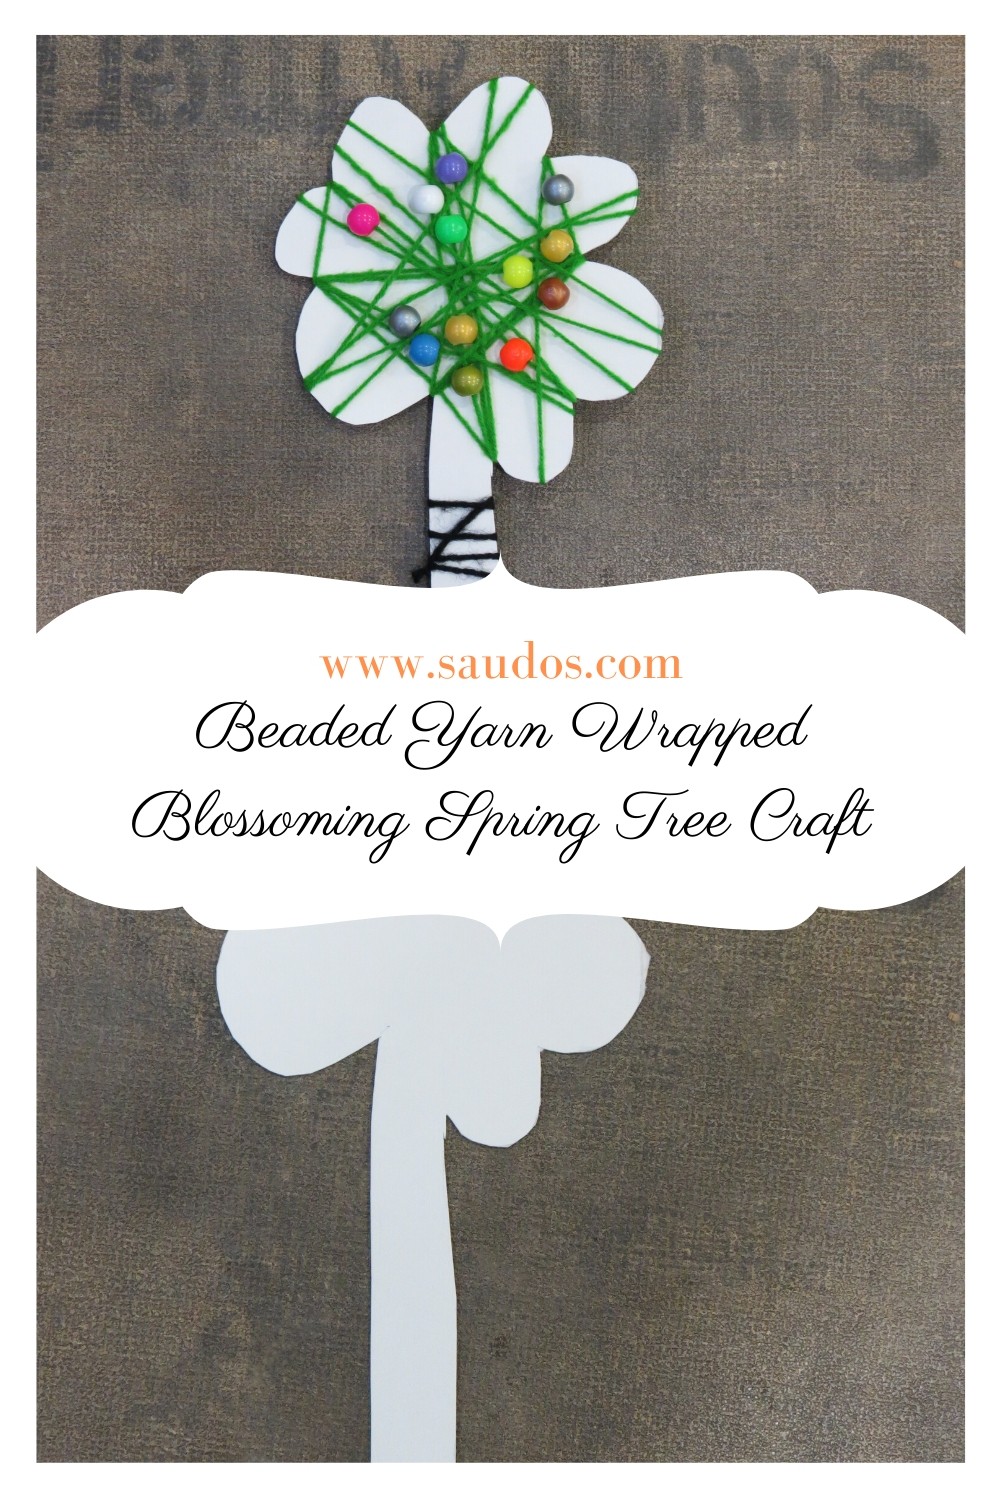 Beaded Yarn Wrapped Blossoming Spring Tree Craft